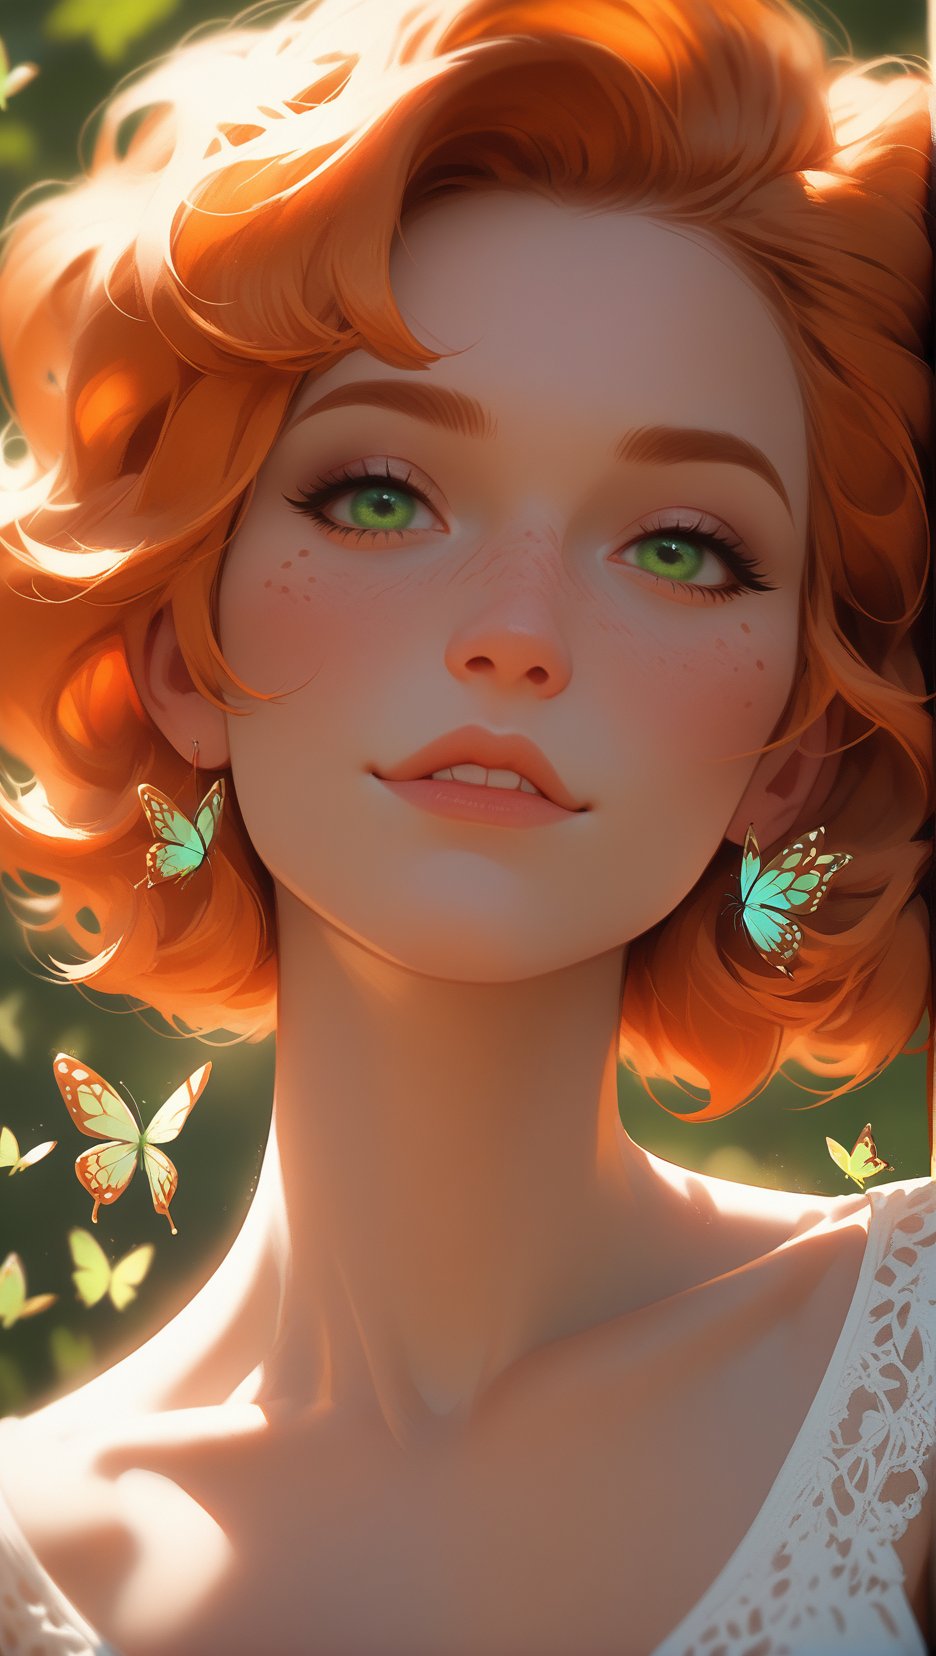 score_9, score_8_up, score_7_up, rating_questionable,Woman, freckles, extremely attractive, adorable, extremely pale skin, orange hair, green eyes, light directed at face, 8k, butterfly lighting style:1